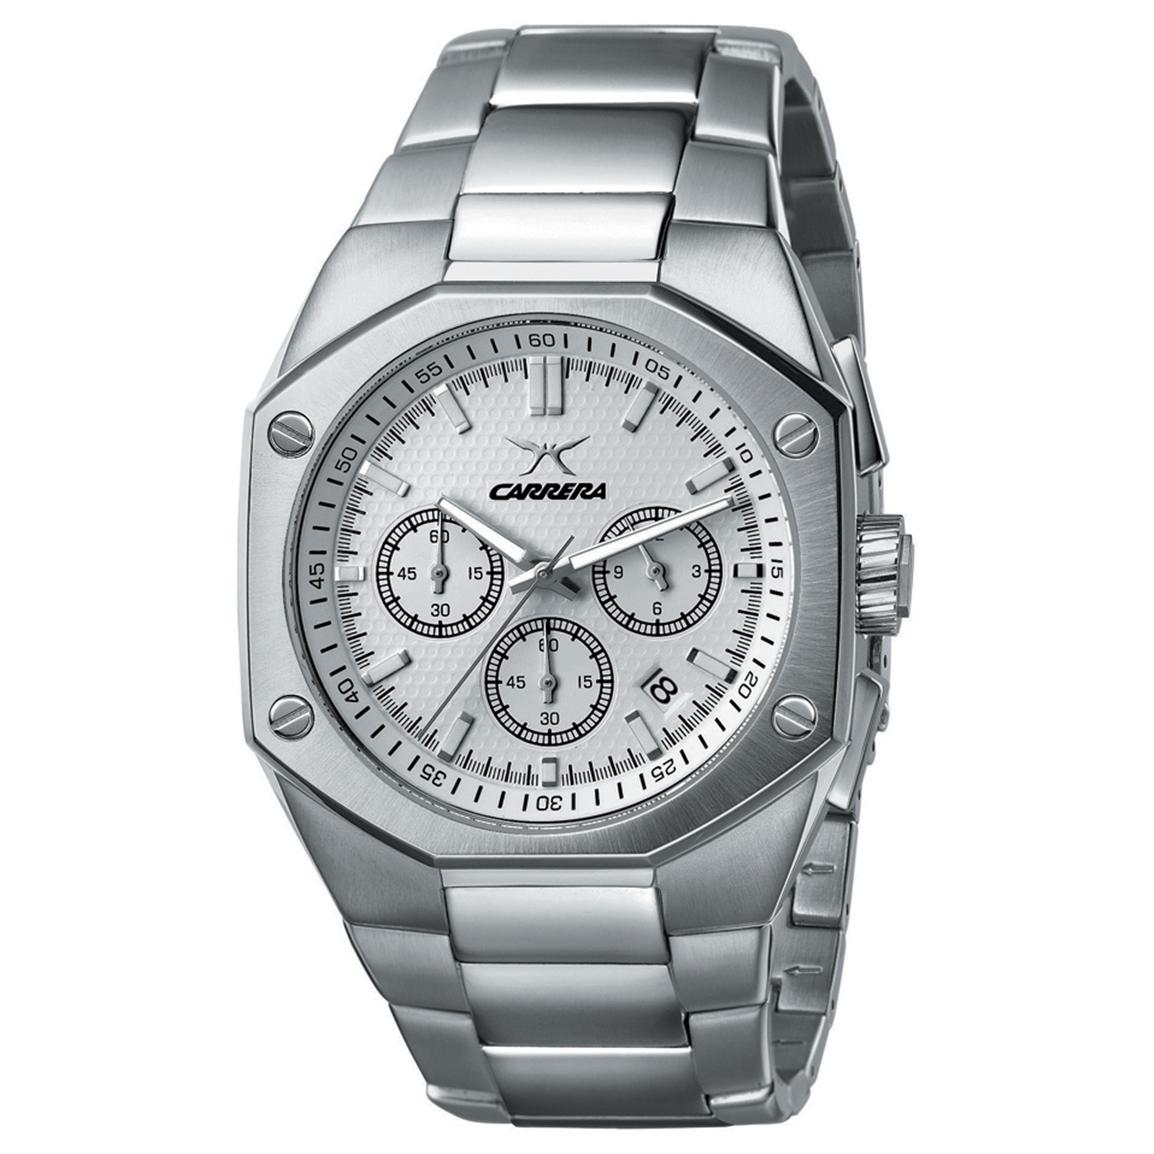 Men's Carrera® Sprint Chronograph Watch, Stainless Steel Band / White ...